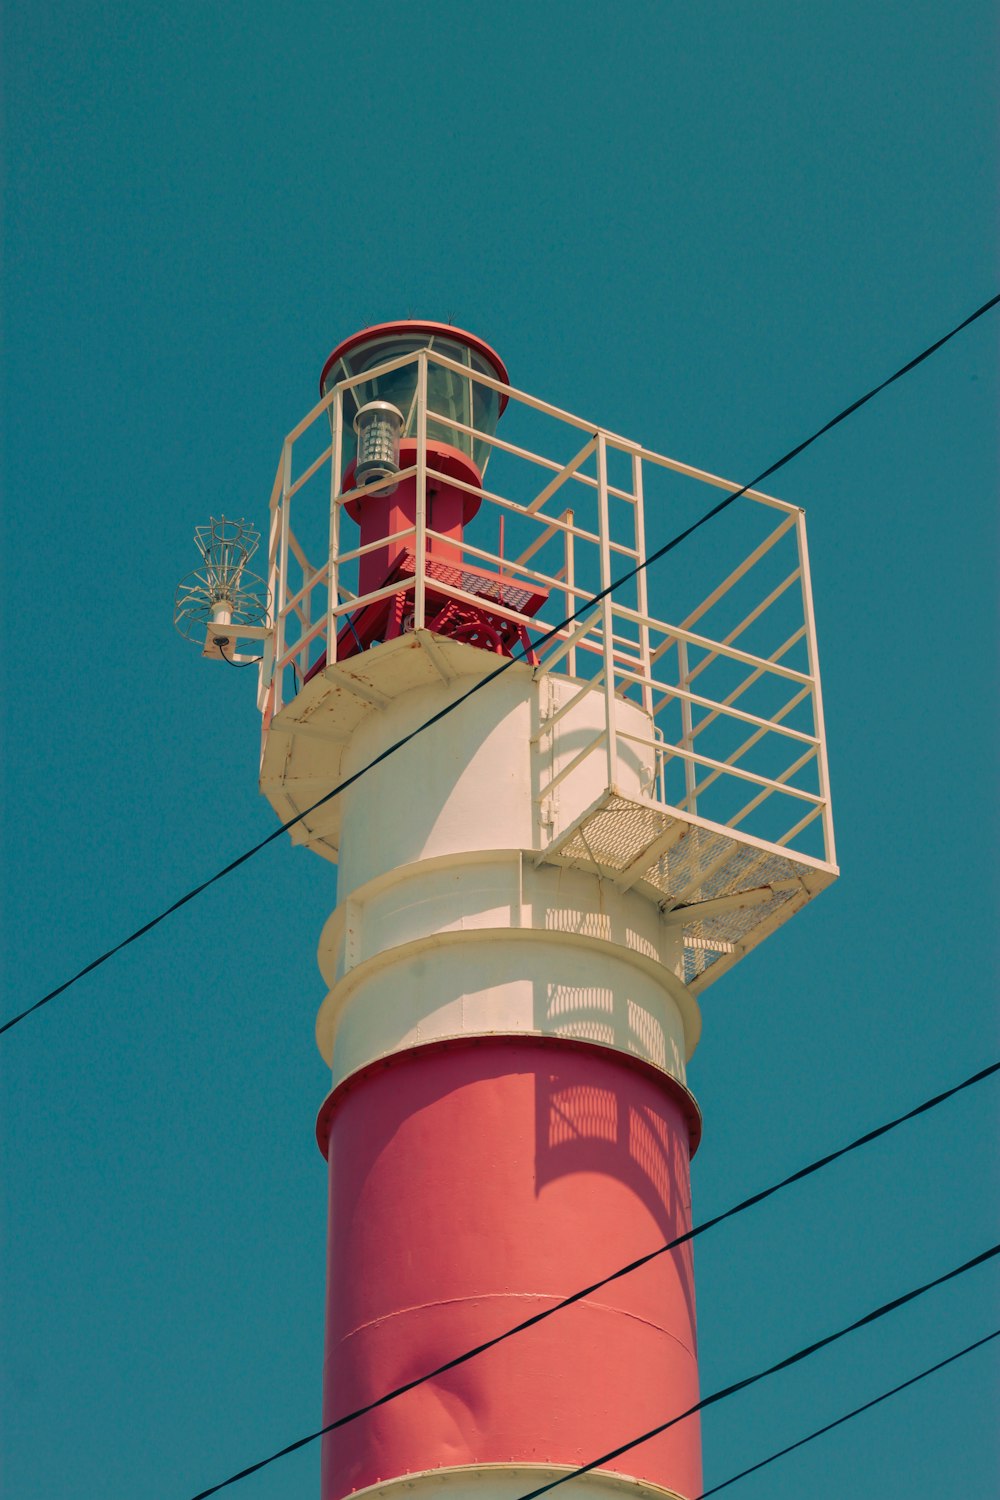 a red and white lighthouse with a blue sky in the background